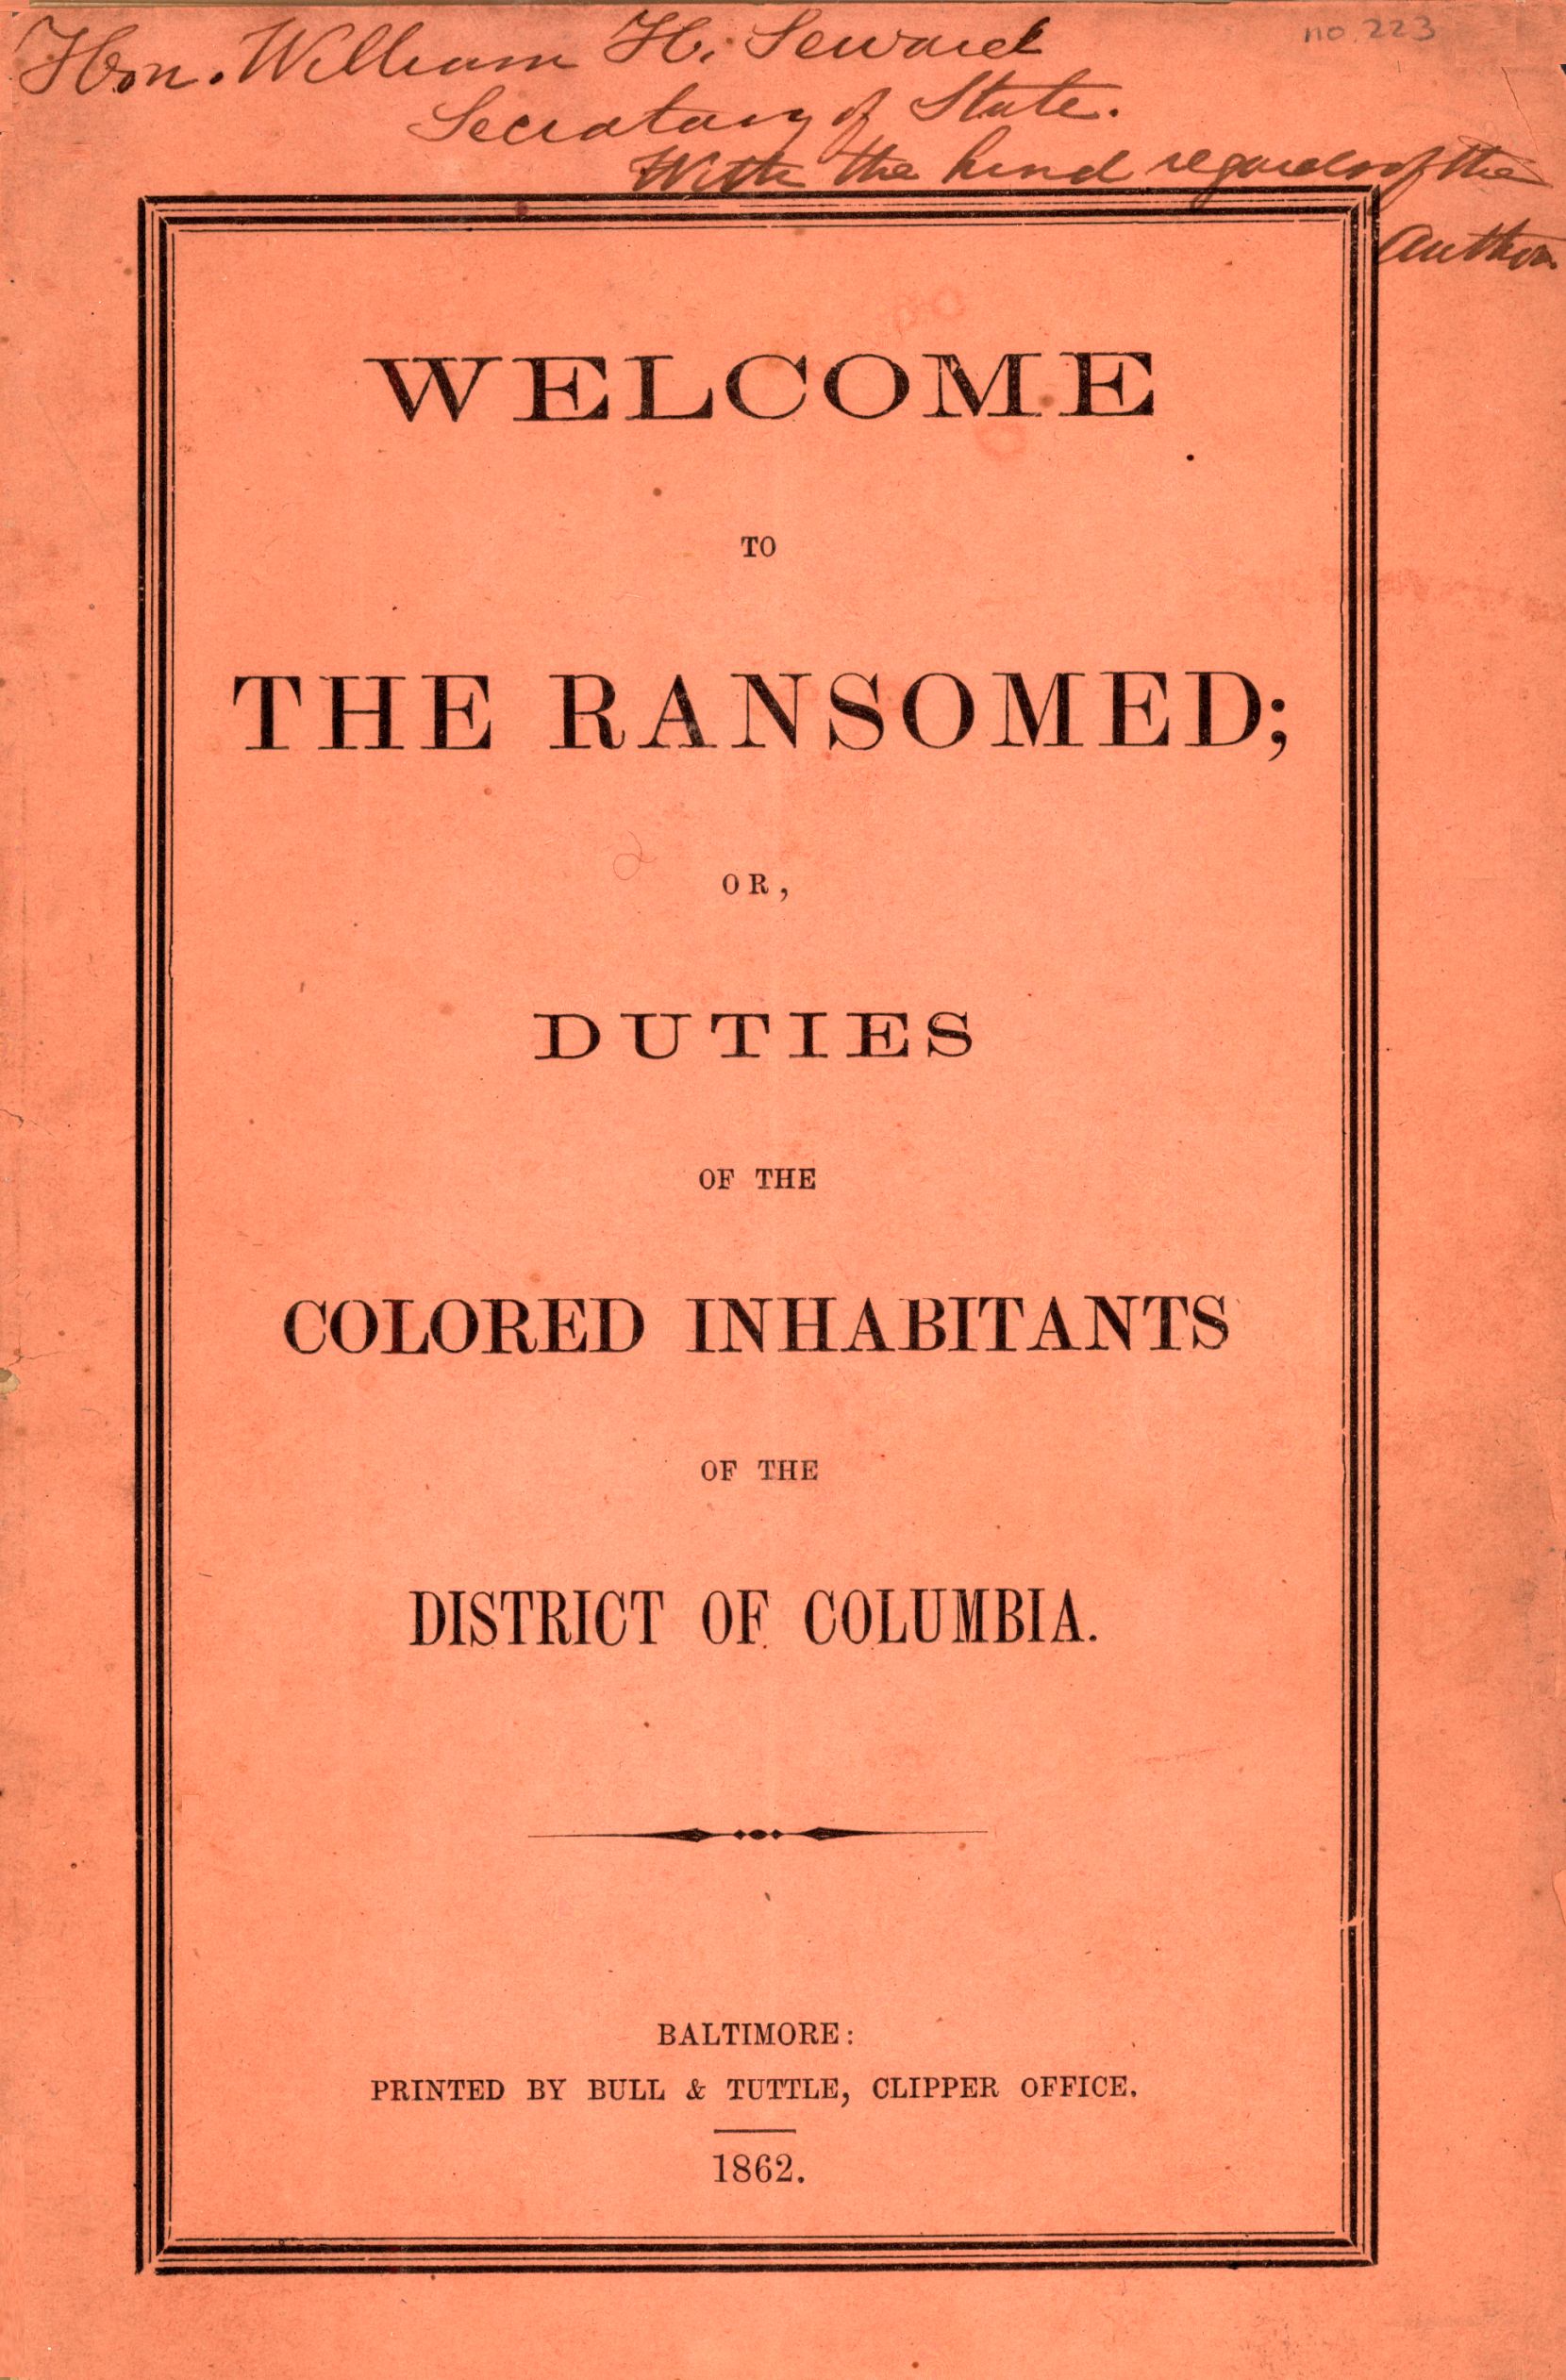 Welcome to the ransomed; or, Duties of the colored inhabitants of the District of Columbia